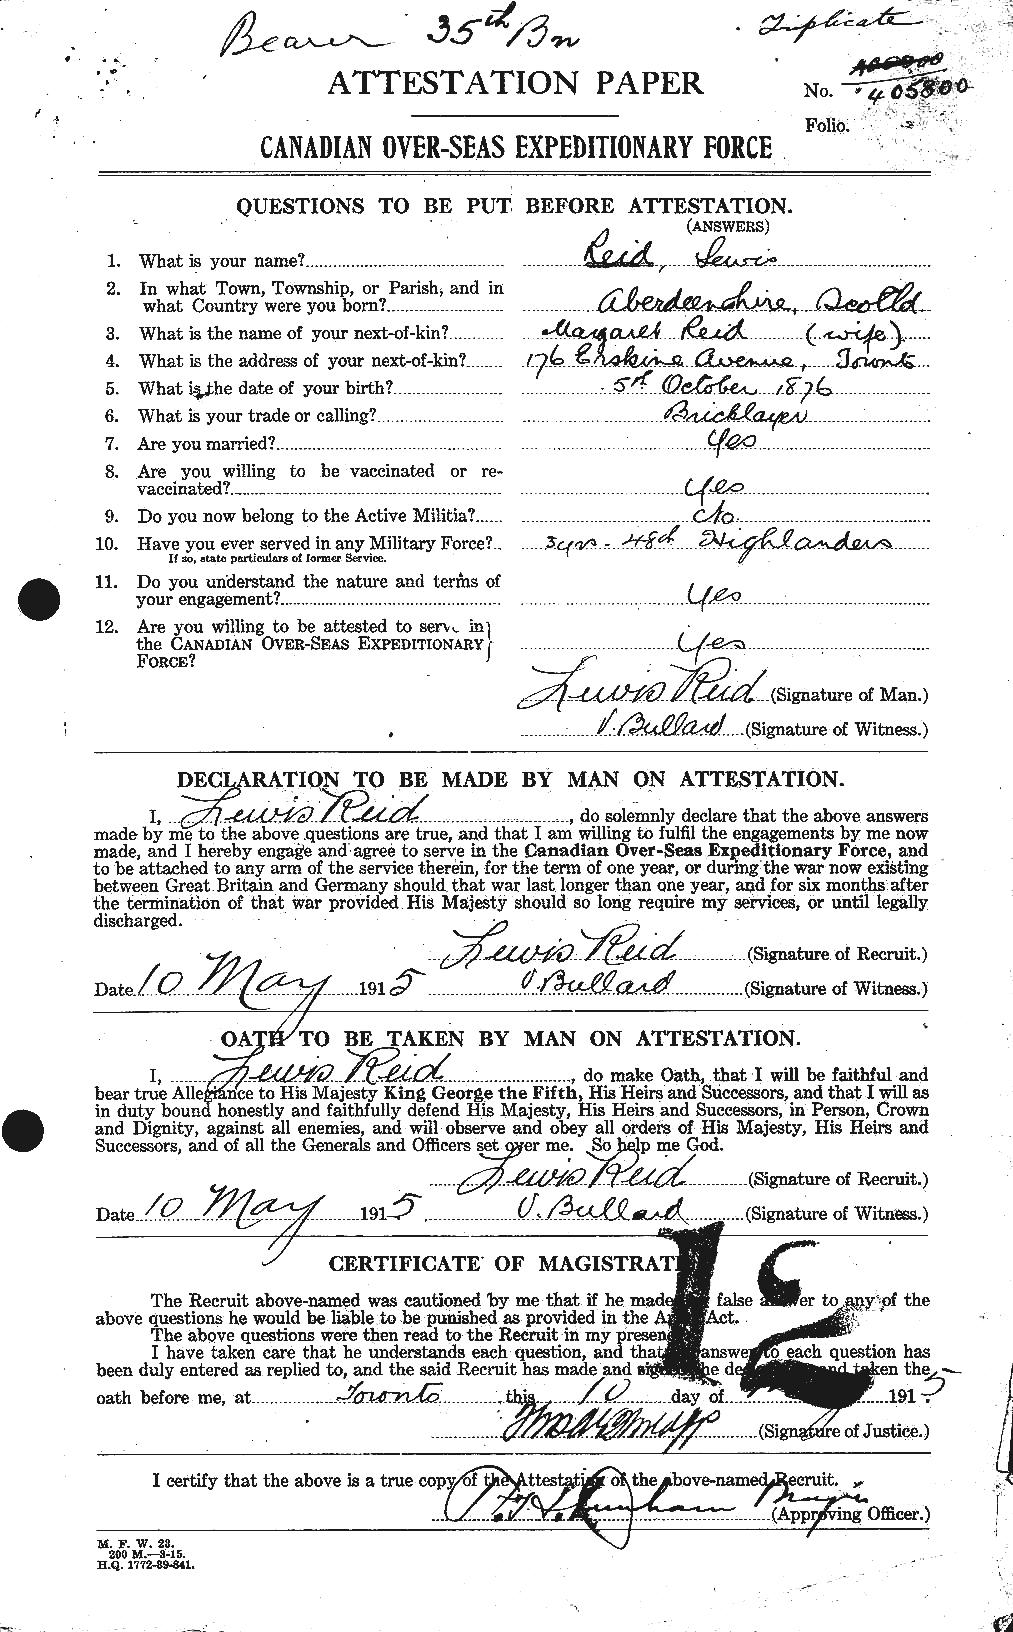 Personnel Records of the First World War - CEF 598922a